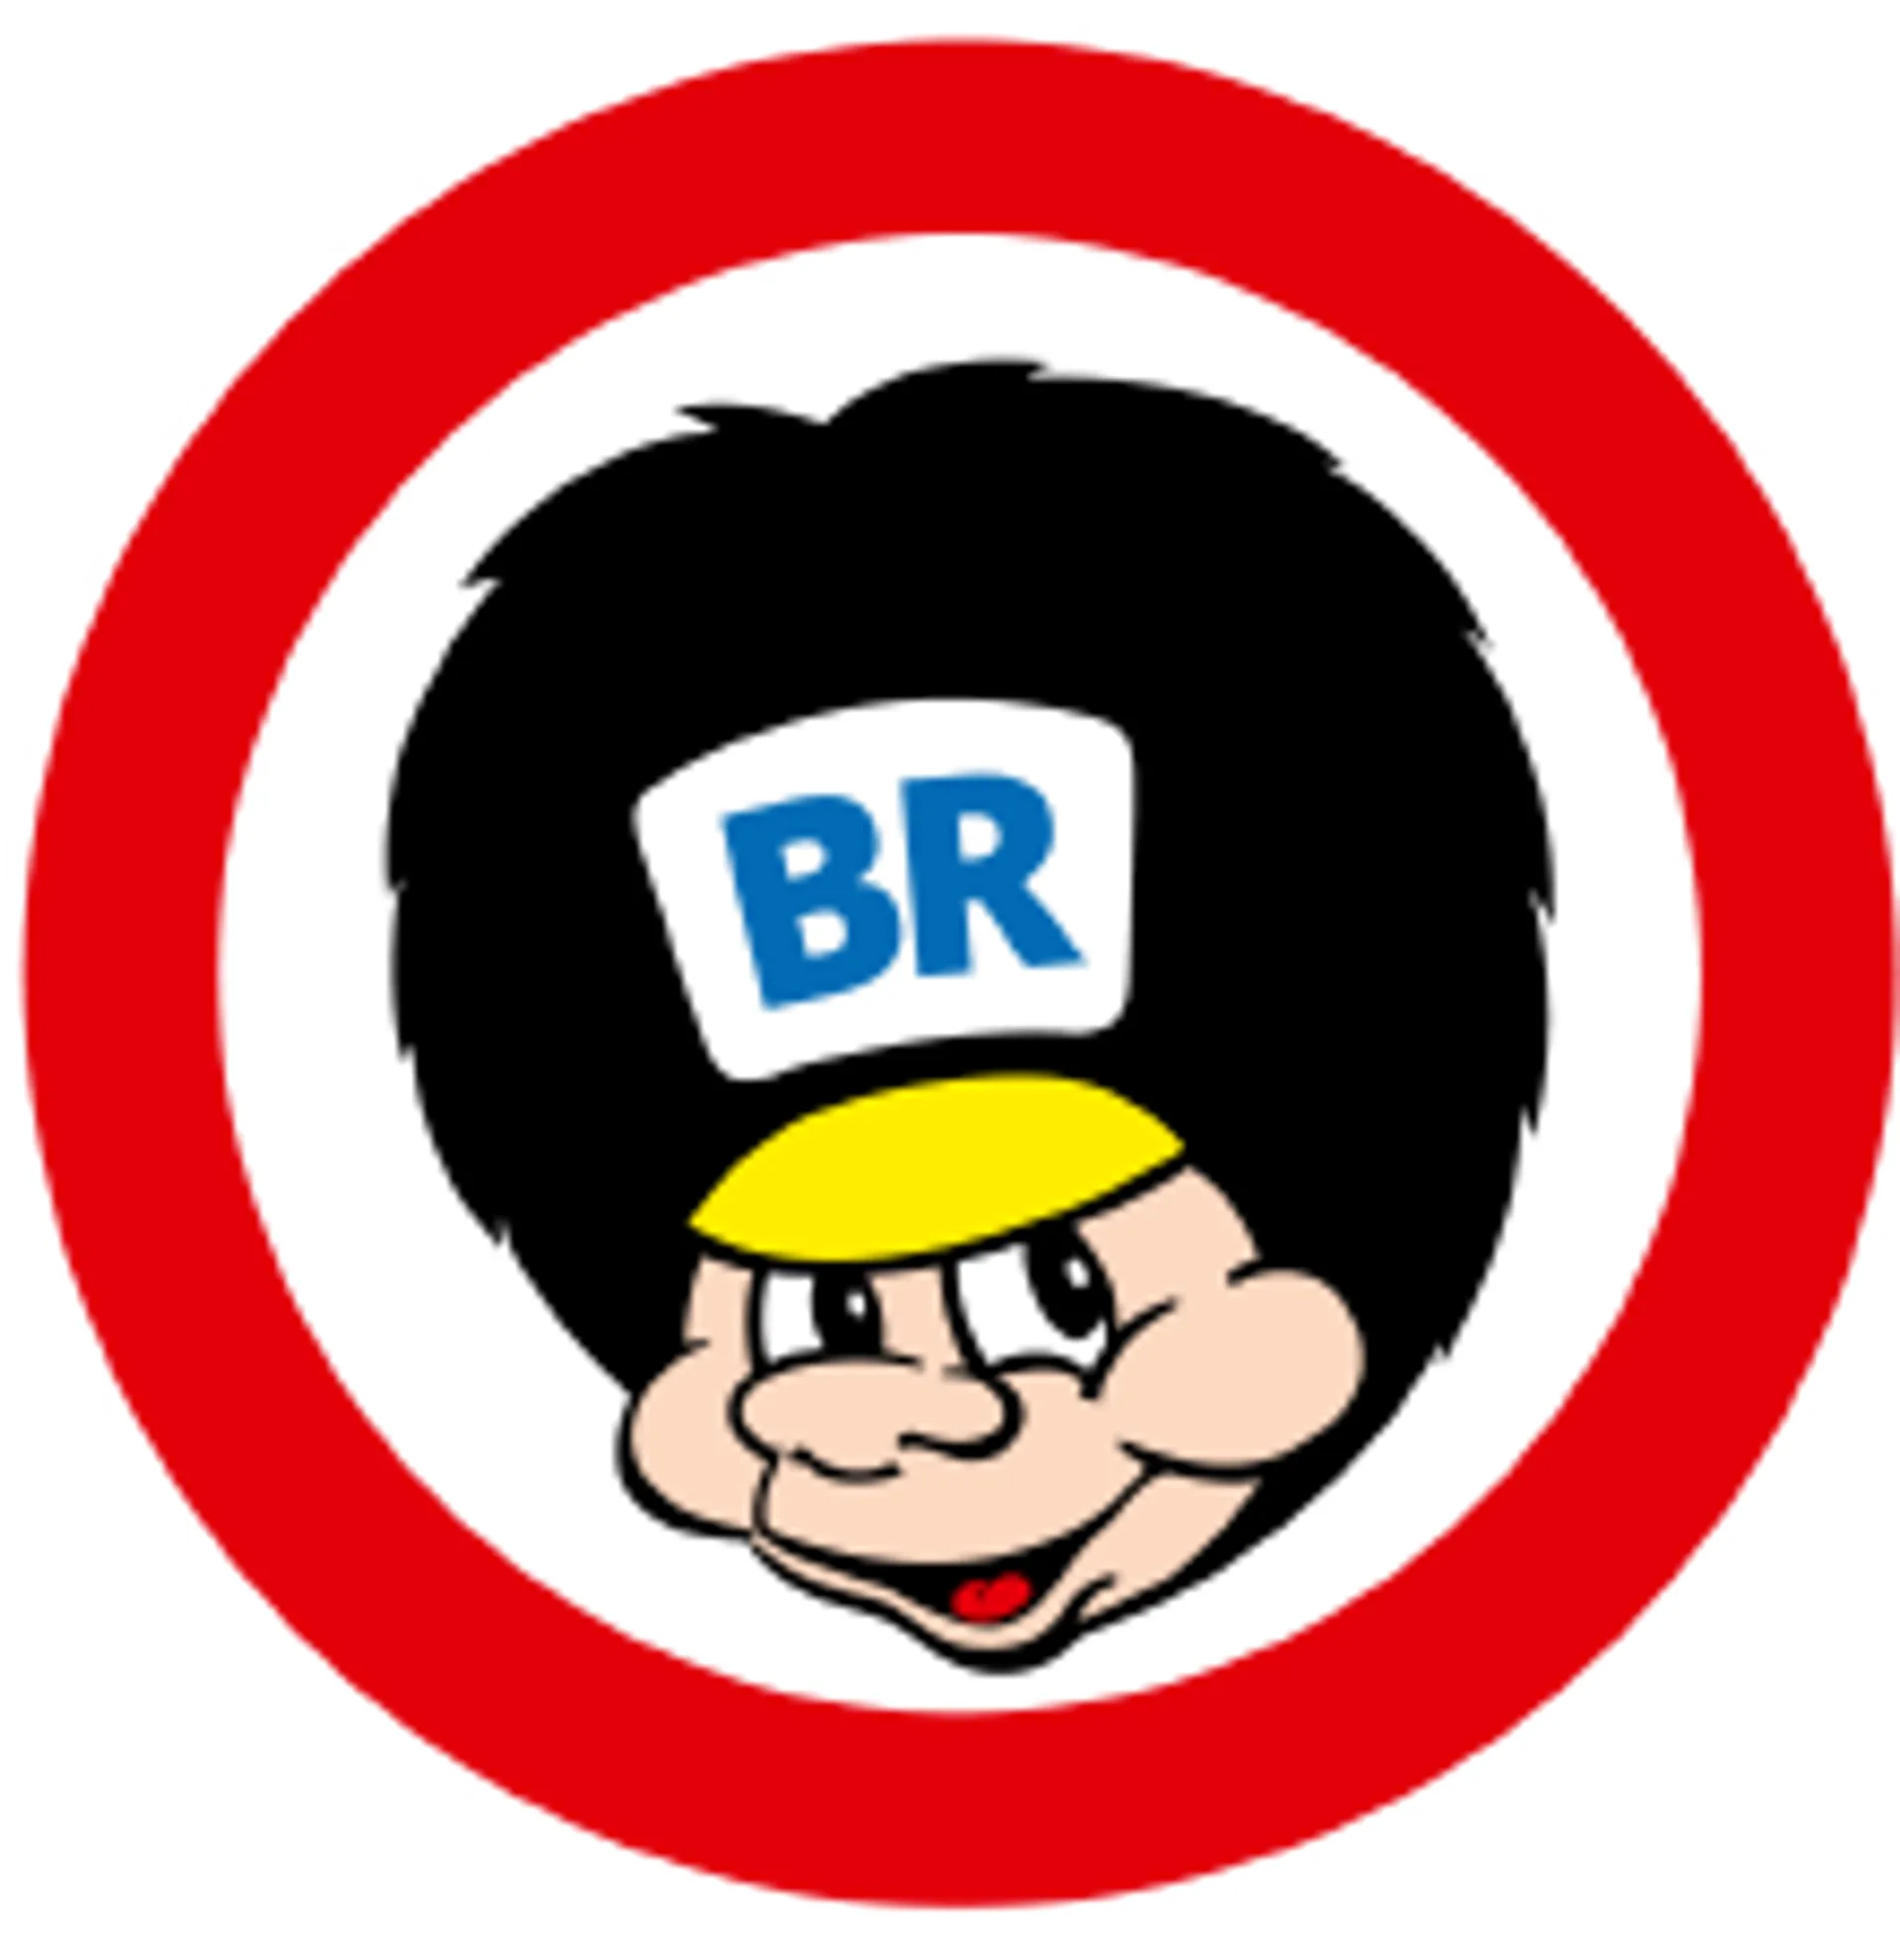 FAETTER BR logo of current catalogue